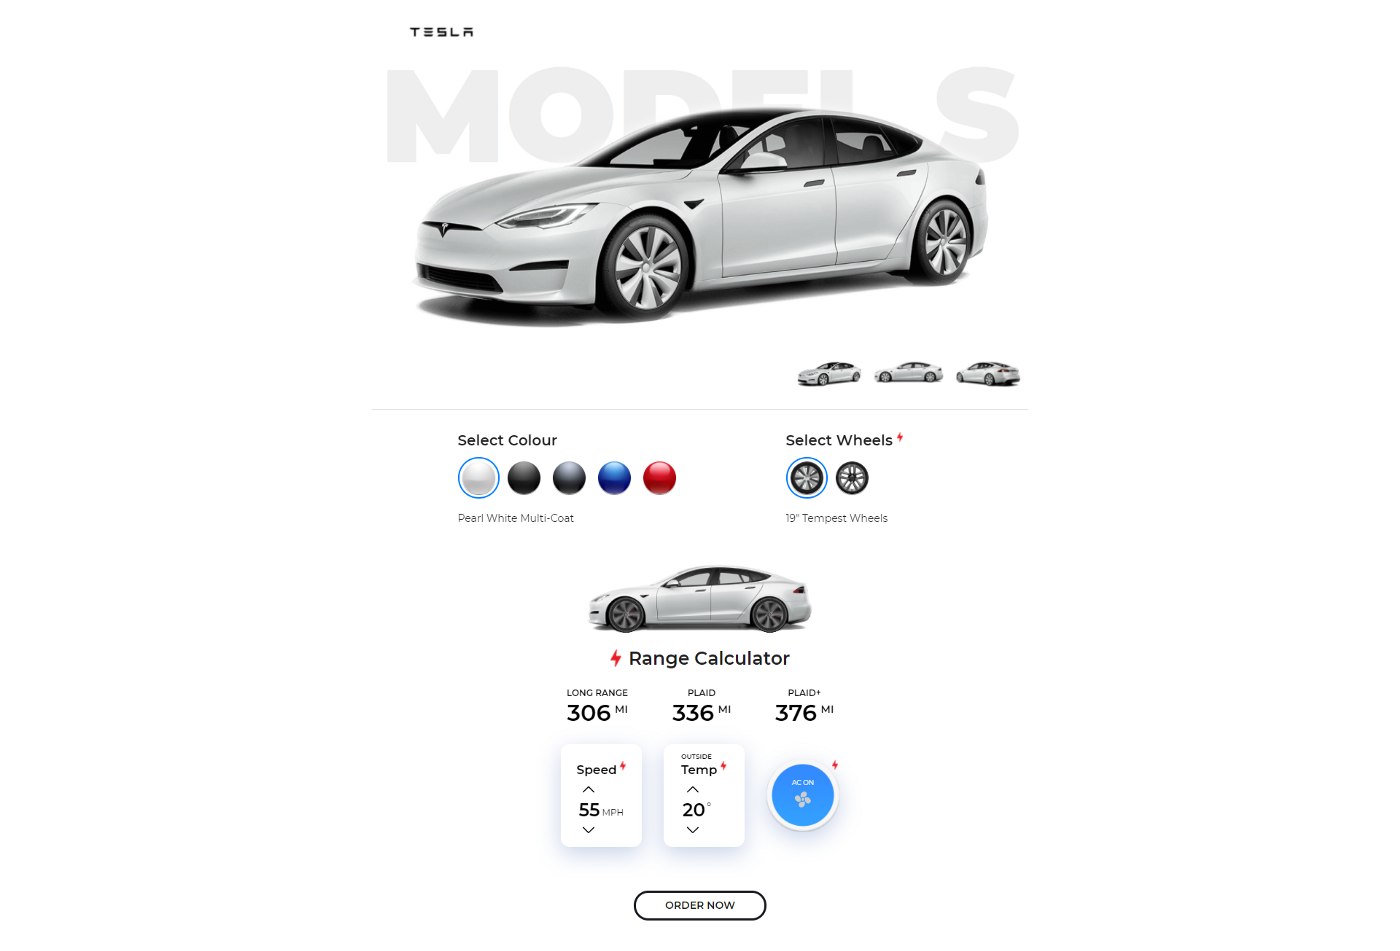 My version of the old Tesla Range Calculator in all of it's glory